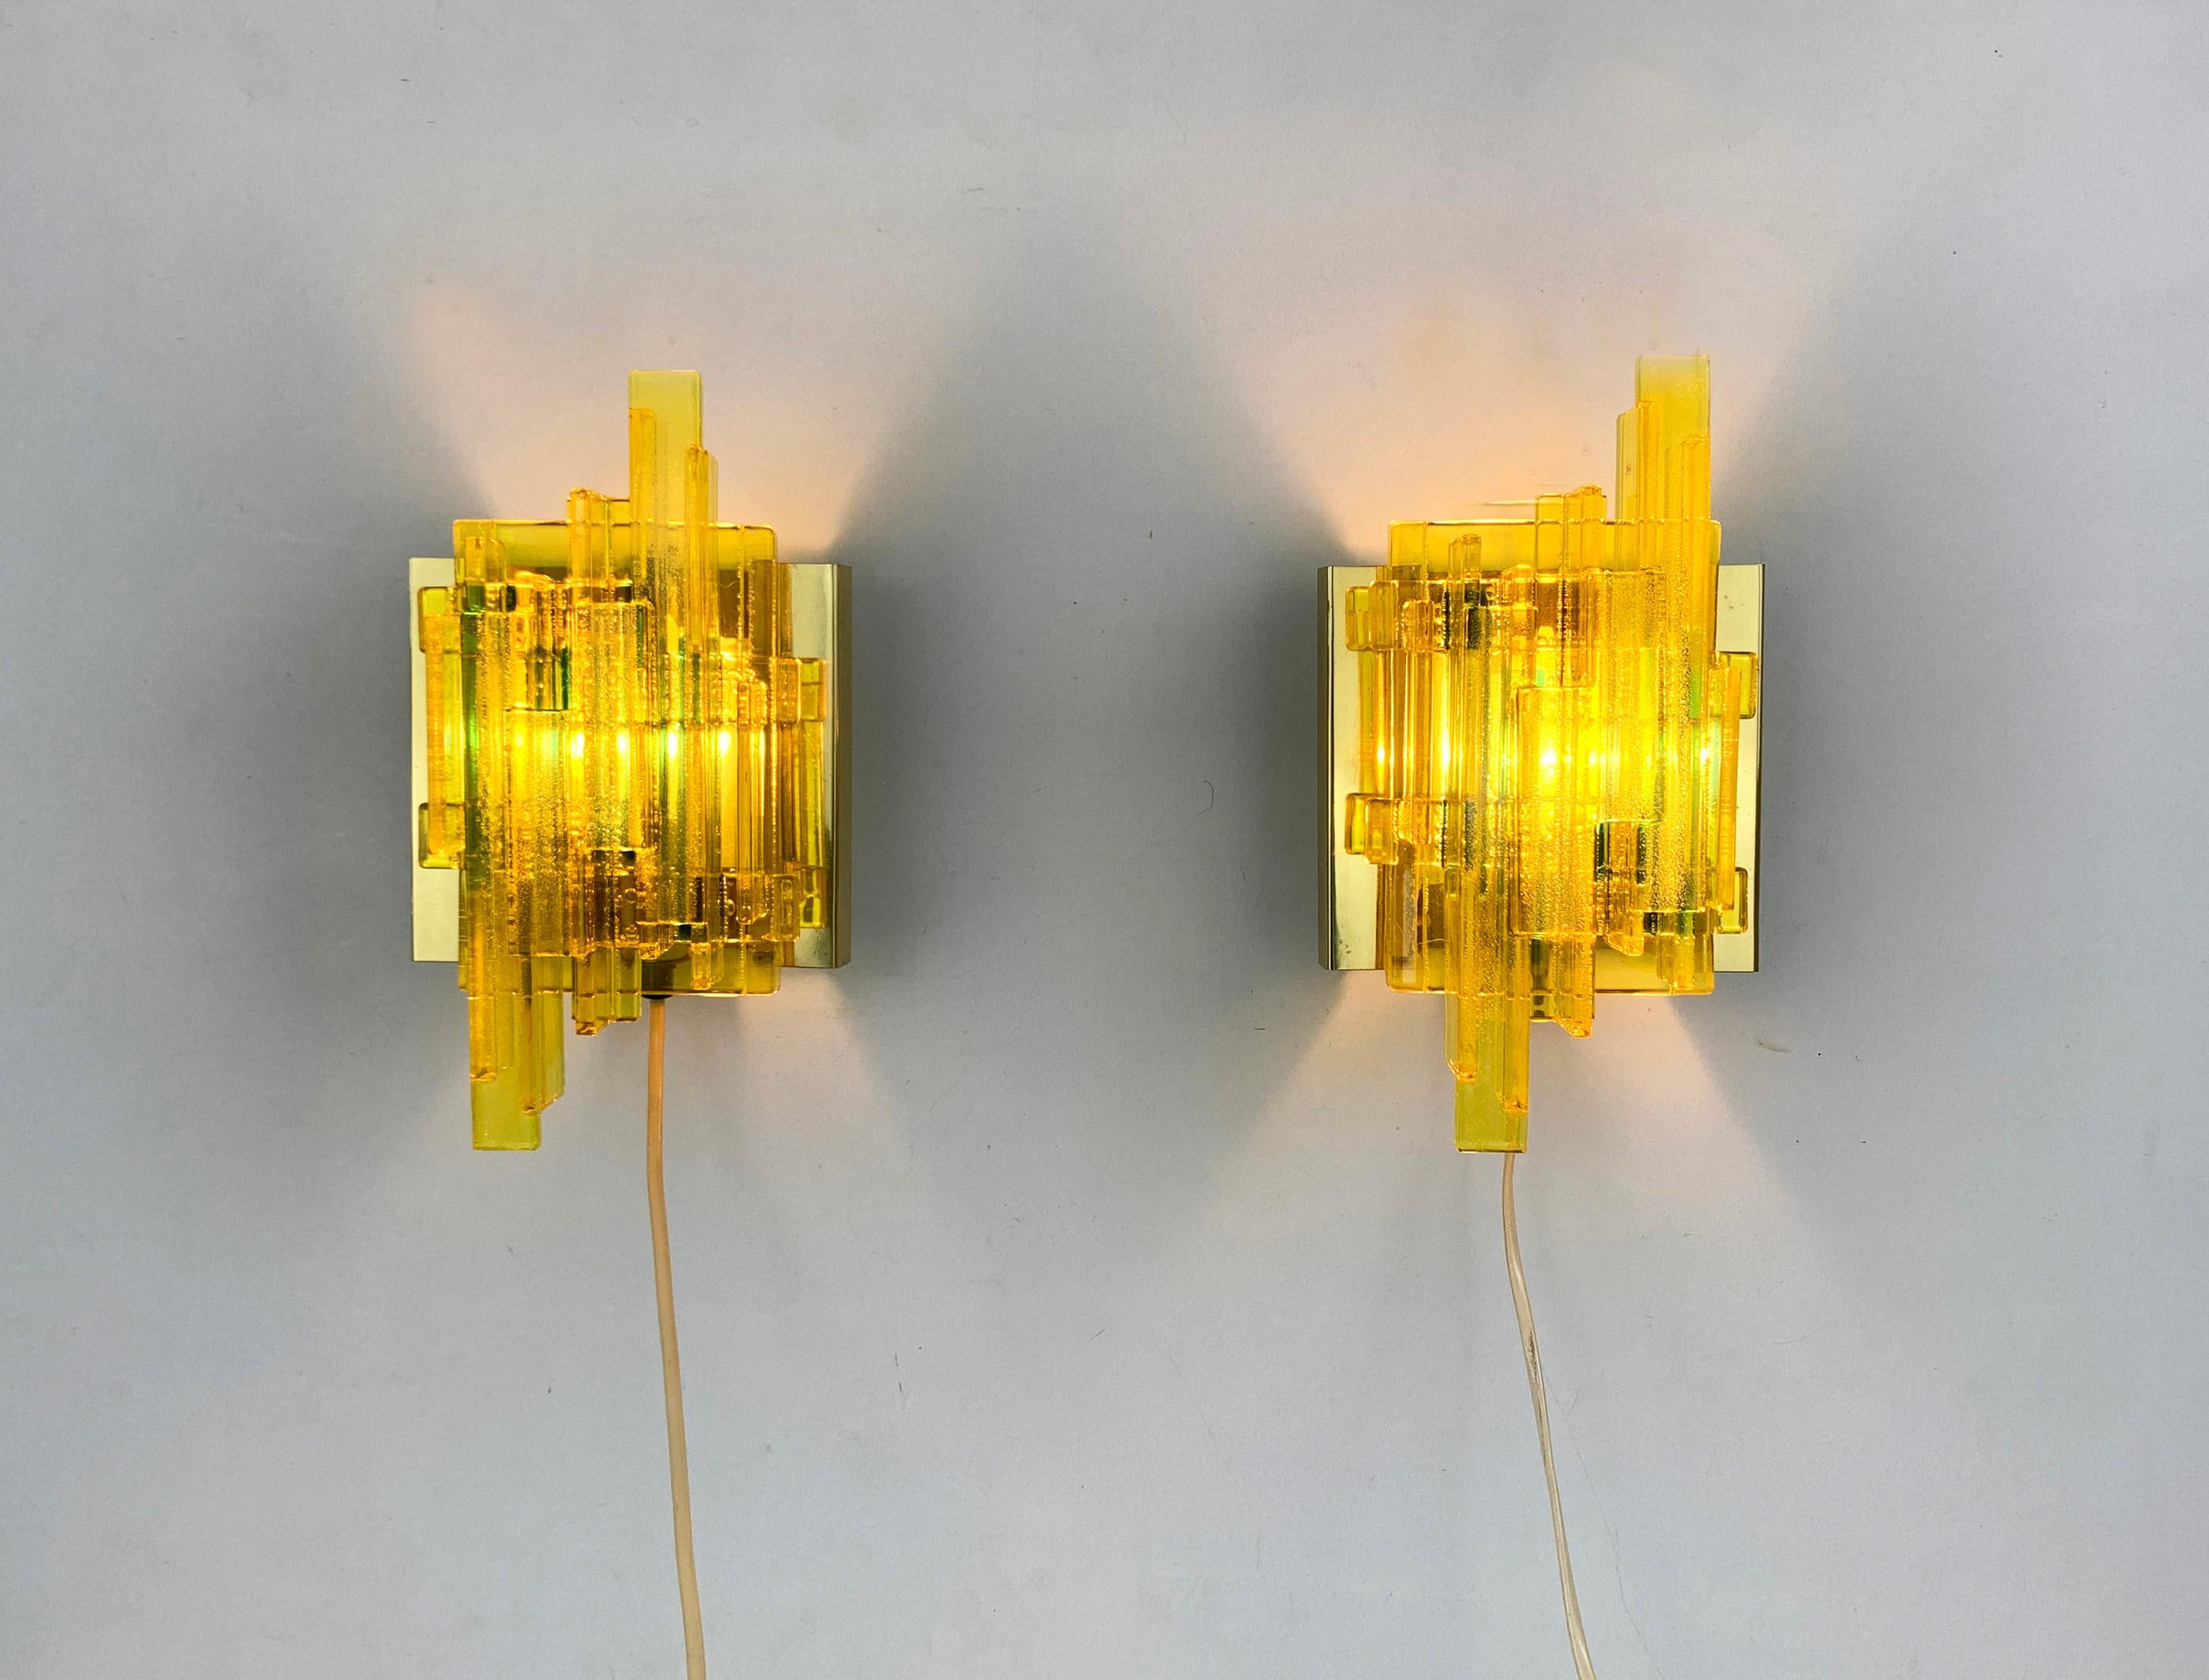 These wall-lamps or sconces were designed by Claus Bolby and manufactured by his own company Cebo Industri in Denmark. 

The lamps come with a composition of yellow acrylics blocs/bars, melted together with inclusion of air bulbs.
When the lamp is